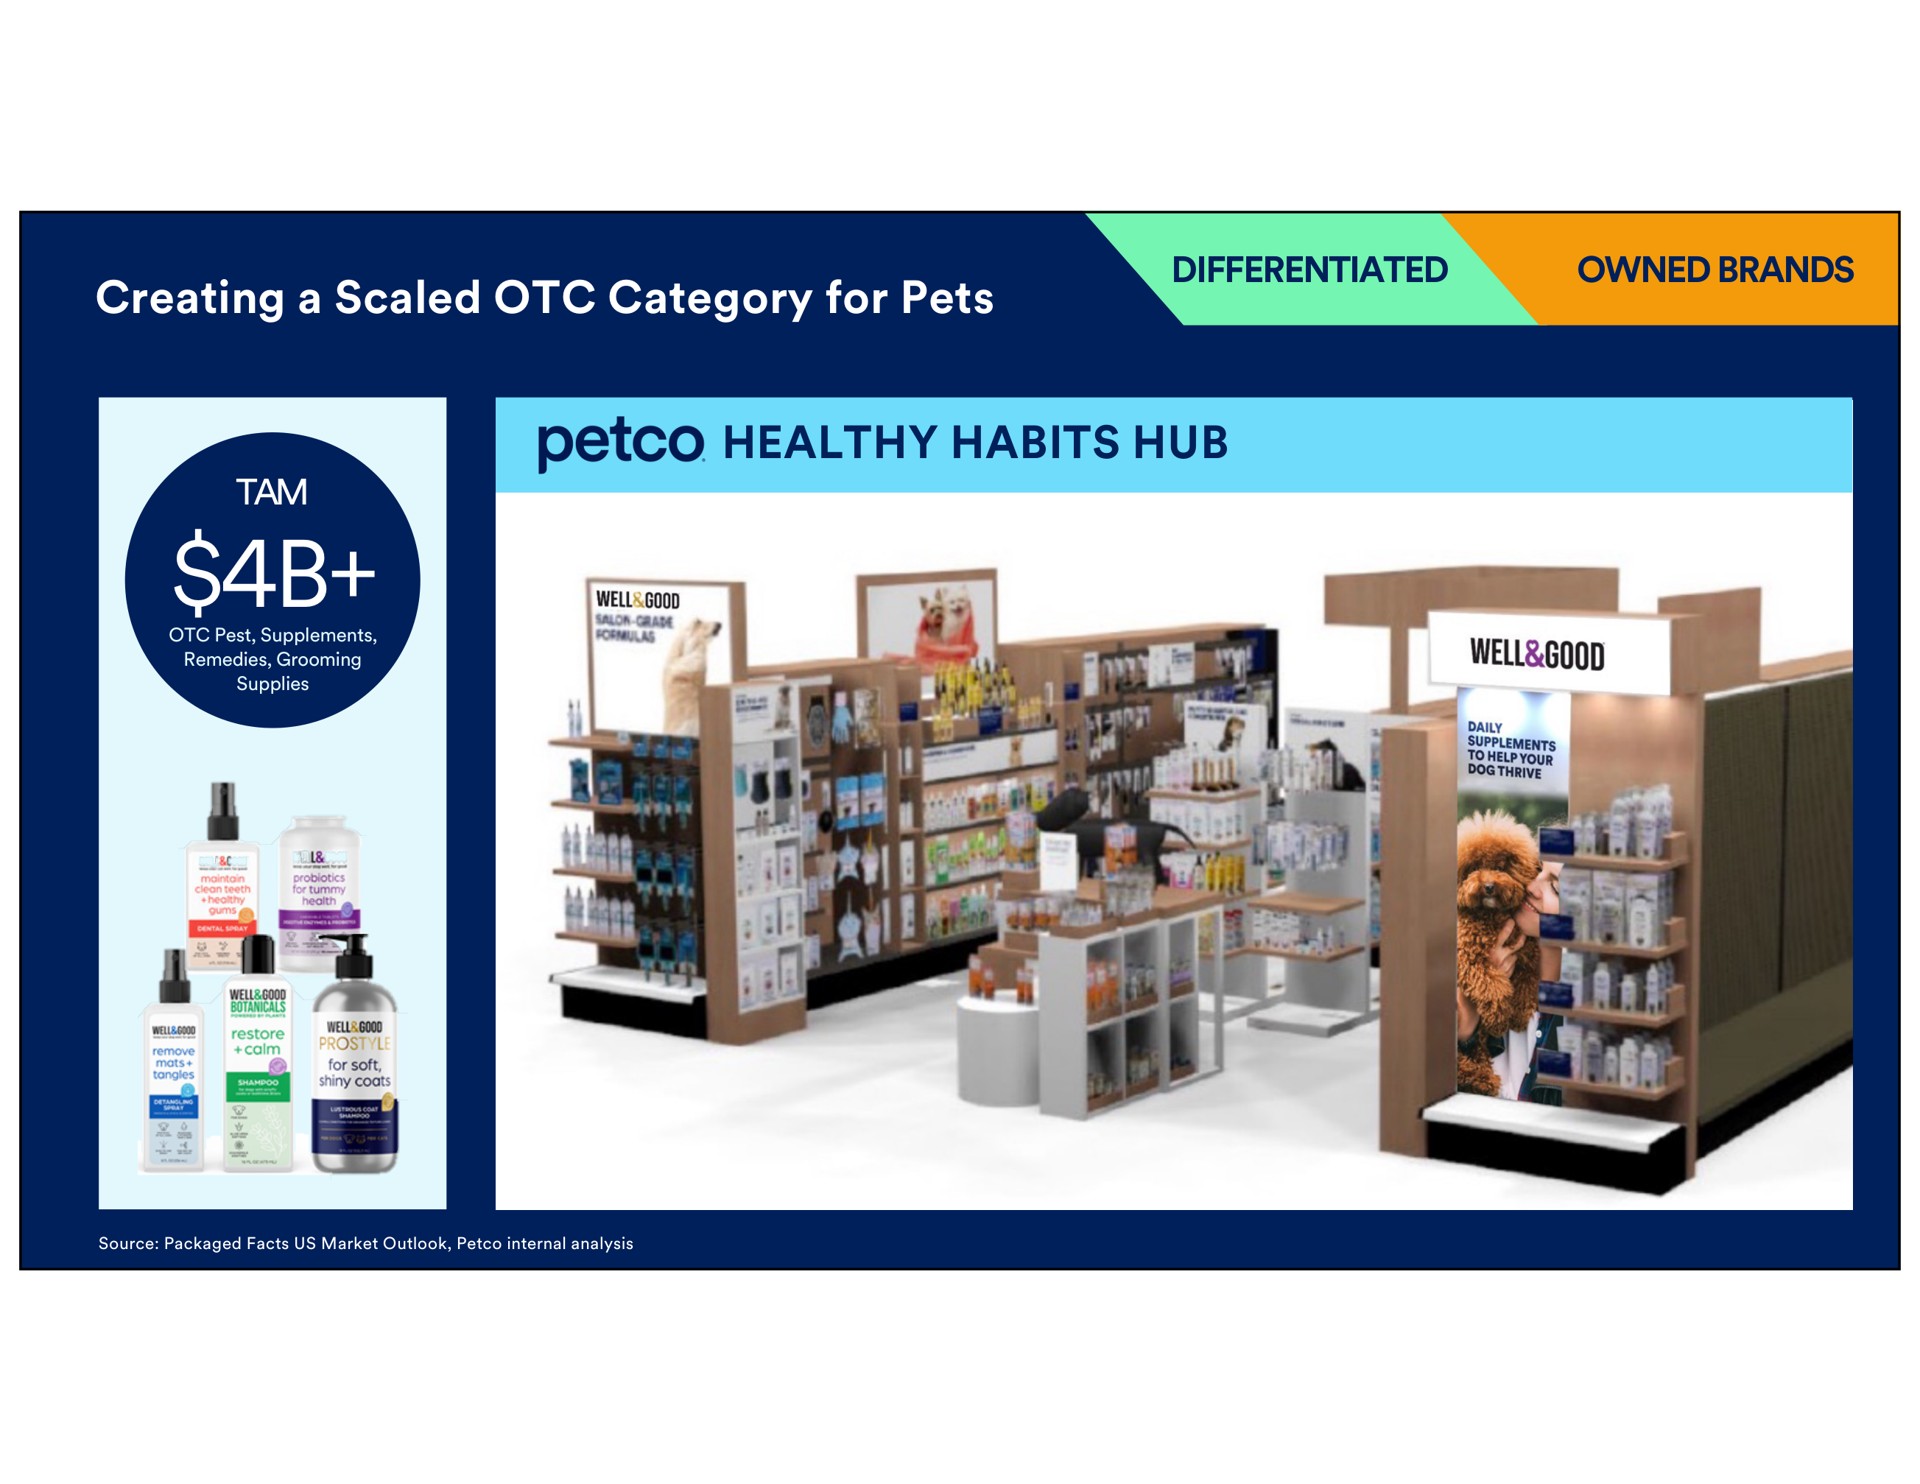 creating a scaled category for pets healthy habits hub owned brands differentiated pest supplements remedies grooming supplies slon as well supplements to help your dog thrive facts packaged source | Petco